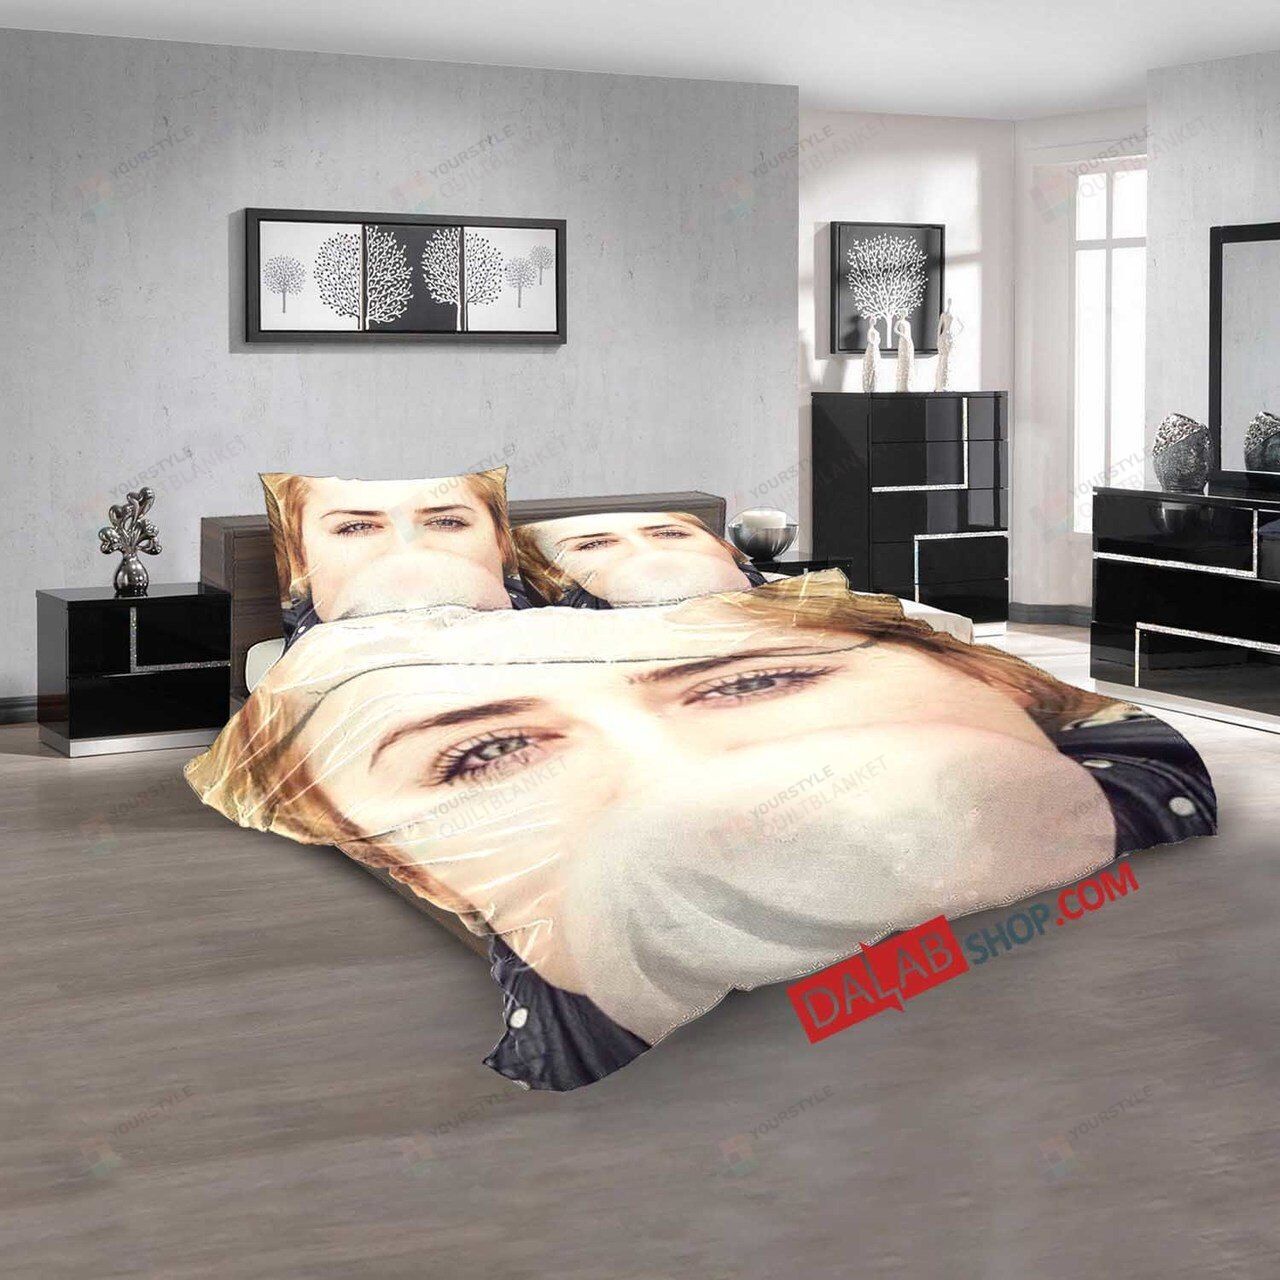 Movie Dancing Quietly V 3d Customized Duvet Cover Bedroom Sets Bedding Sets